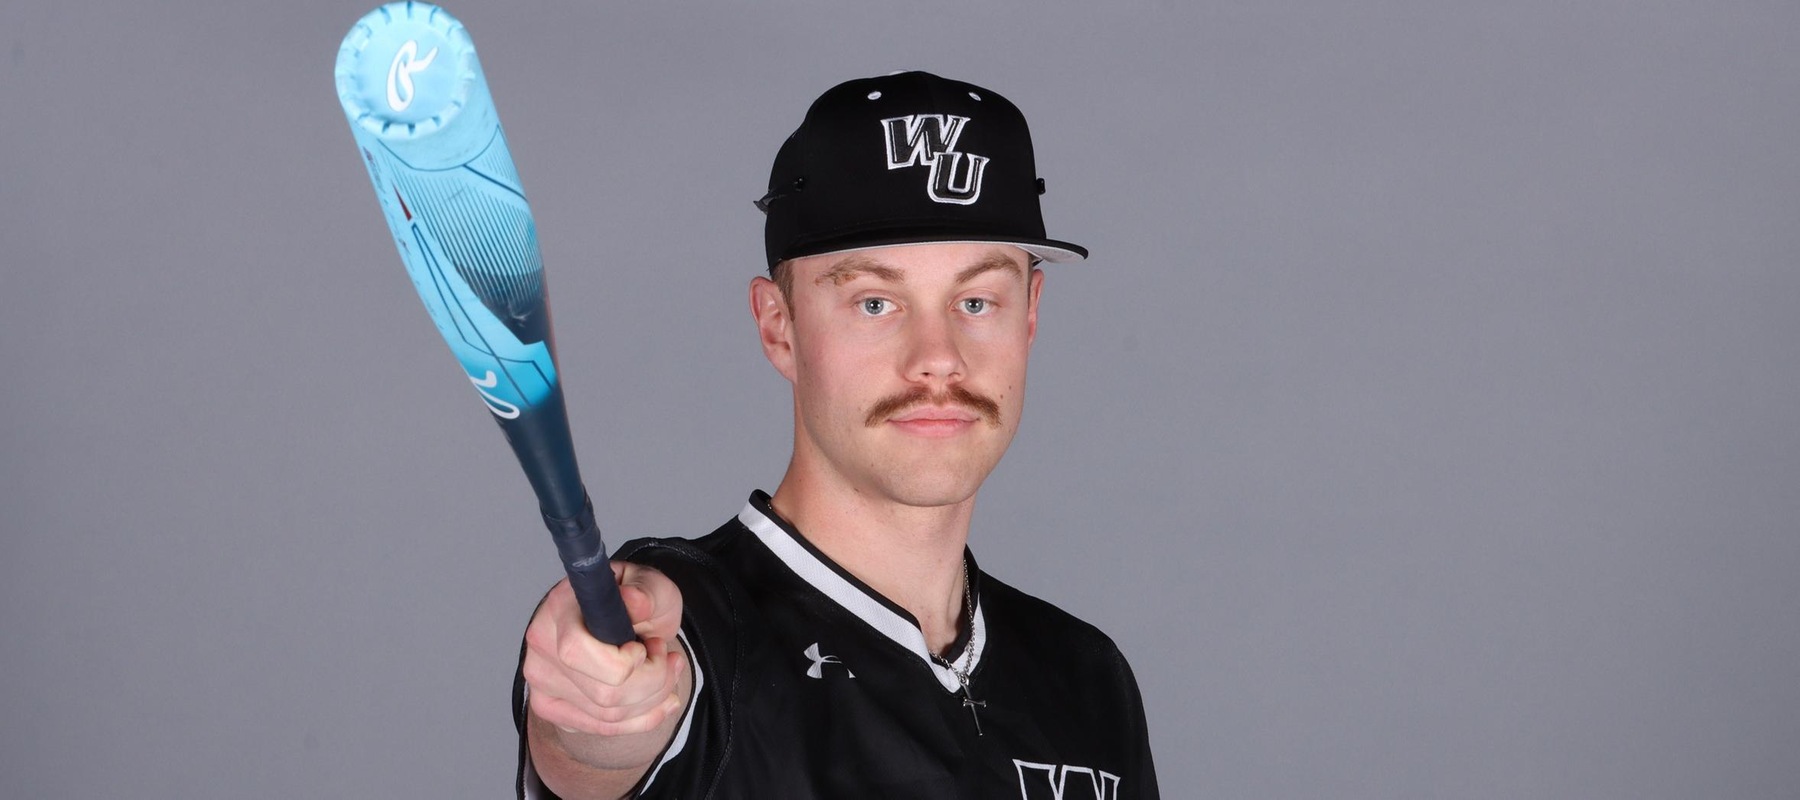 Photo of Jack McDonald who hit two homers in game two against New Haven. Copyright 2024; Wilmington University. All rights reserved. Photo by Dan Lauletta.